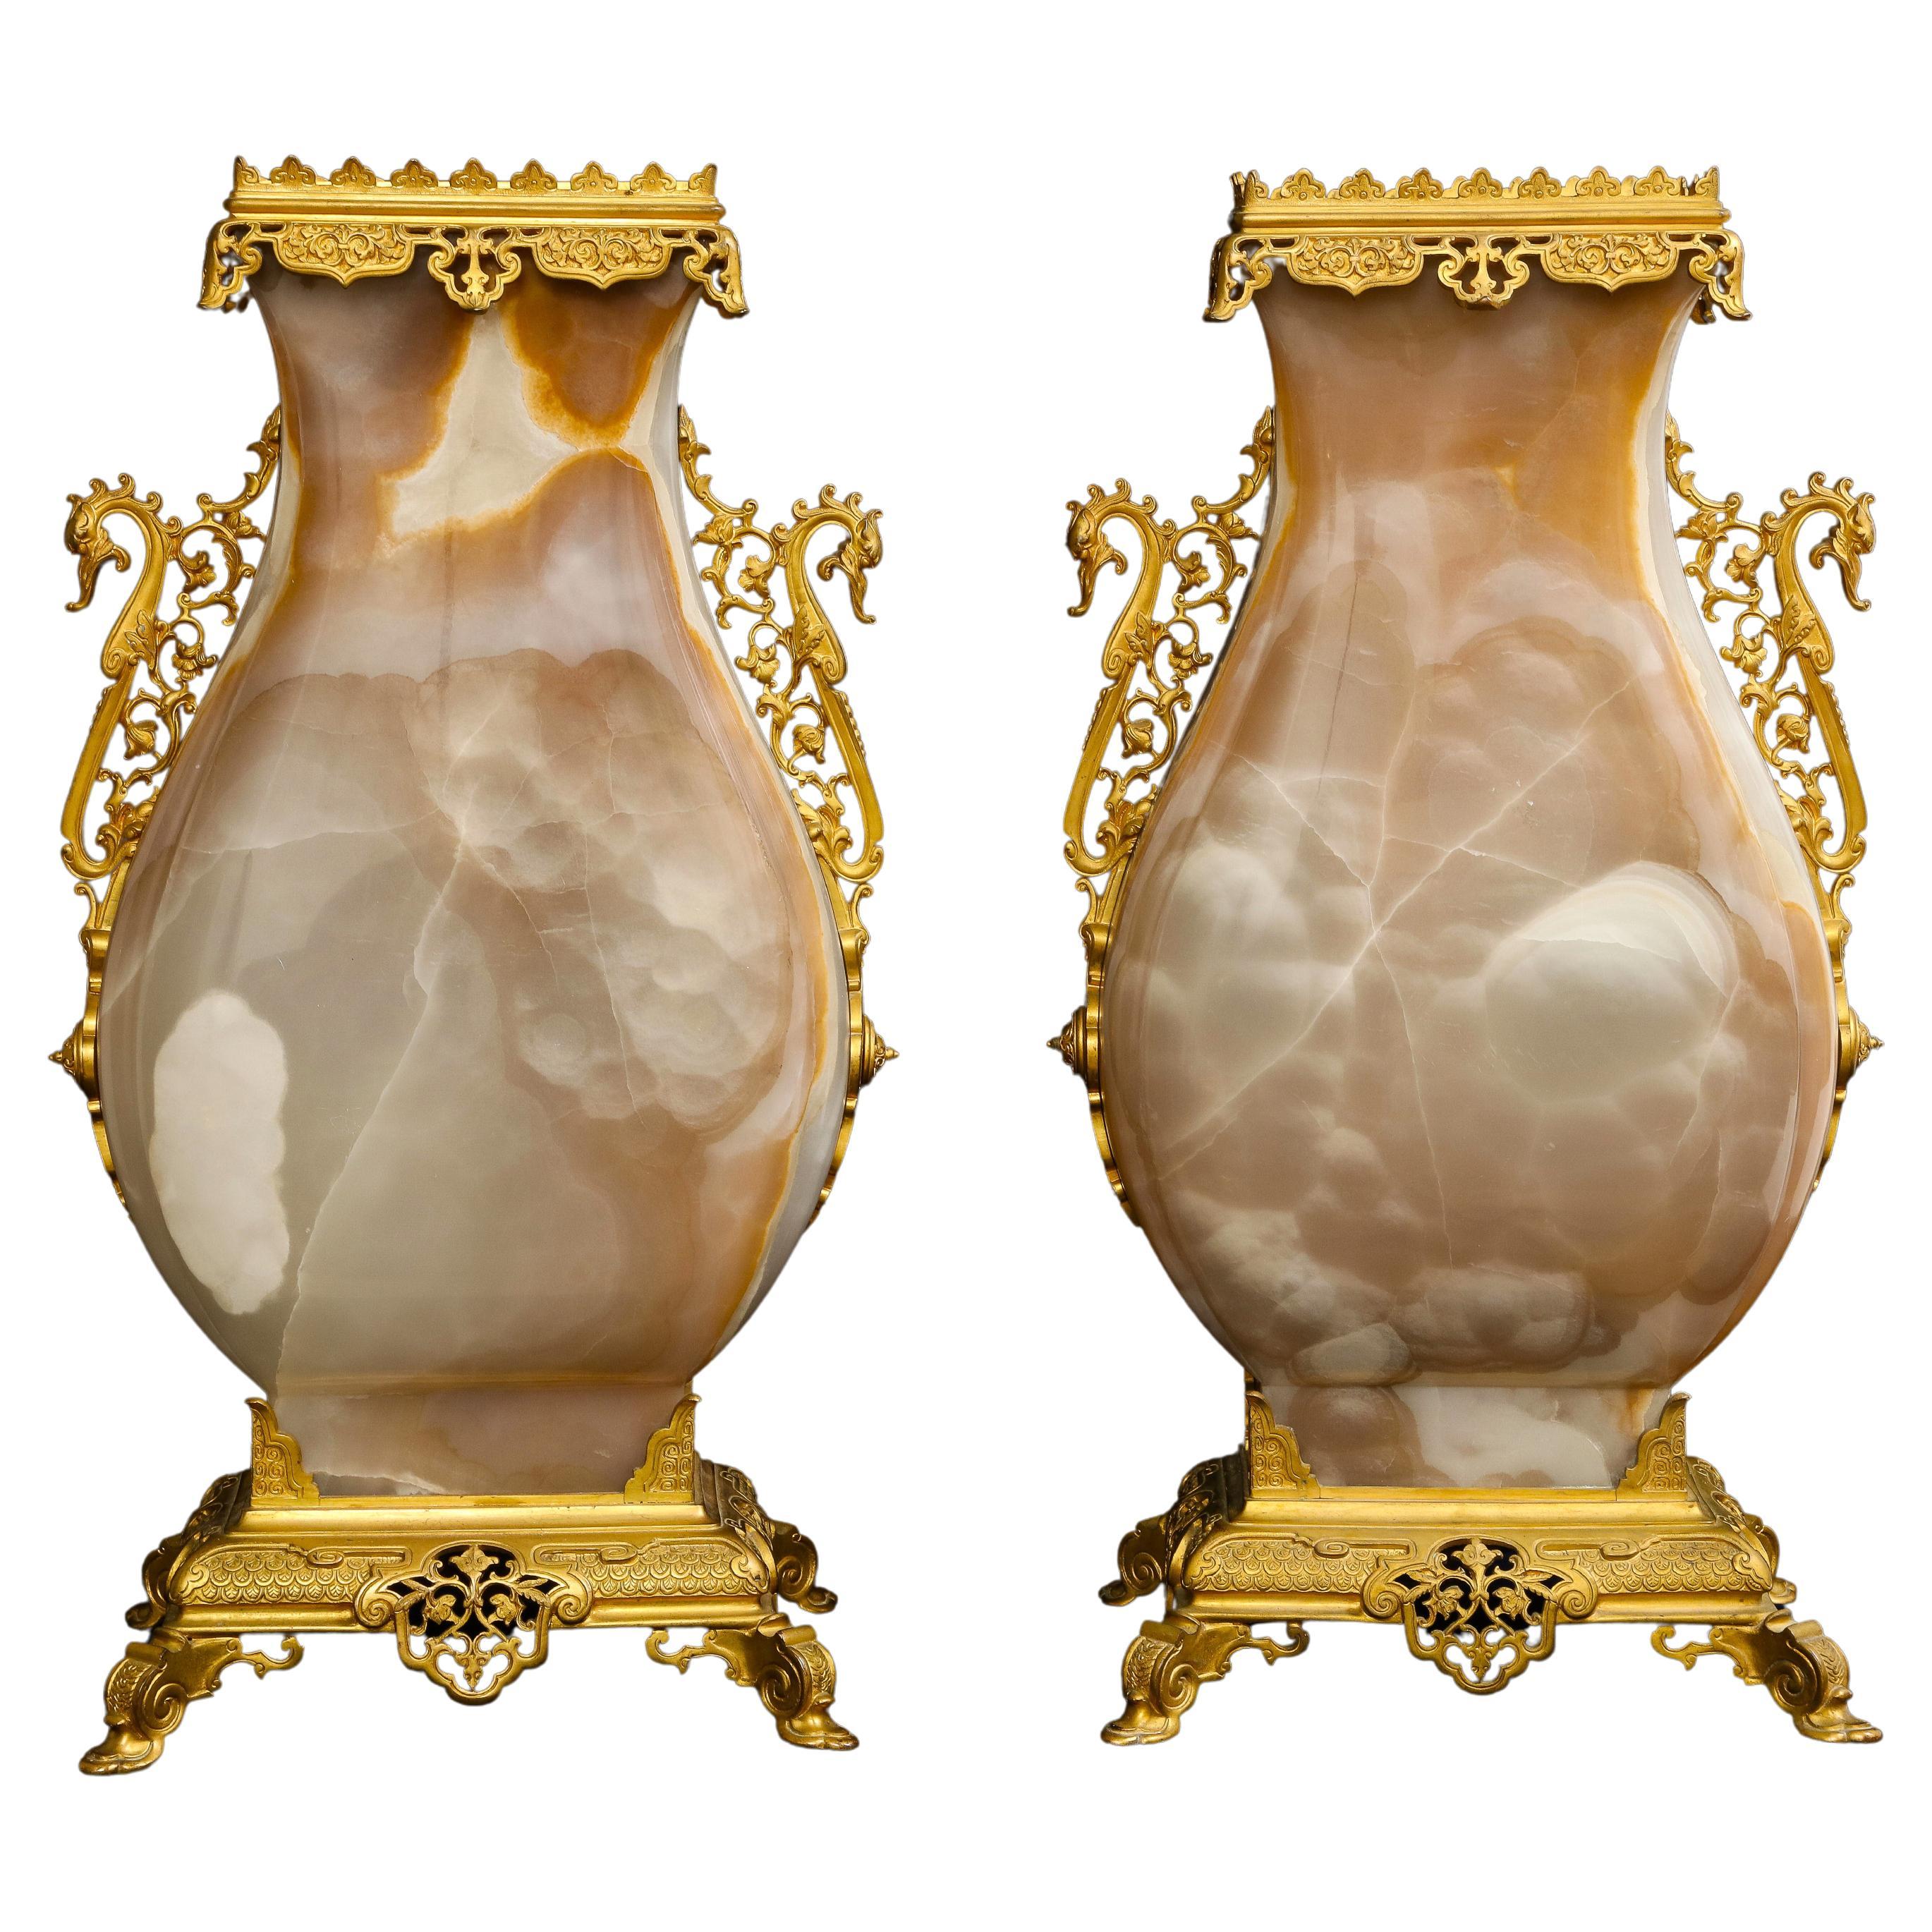 Large Pair of 19 C. French Ormolu Mounted Carved Agate Vases, Att. to E. Lievre